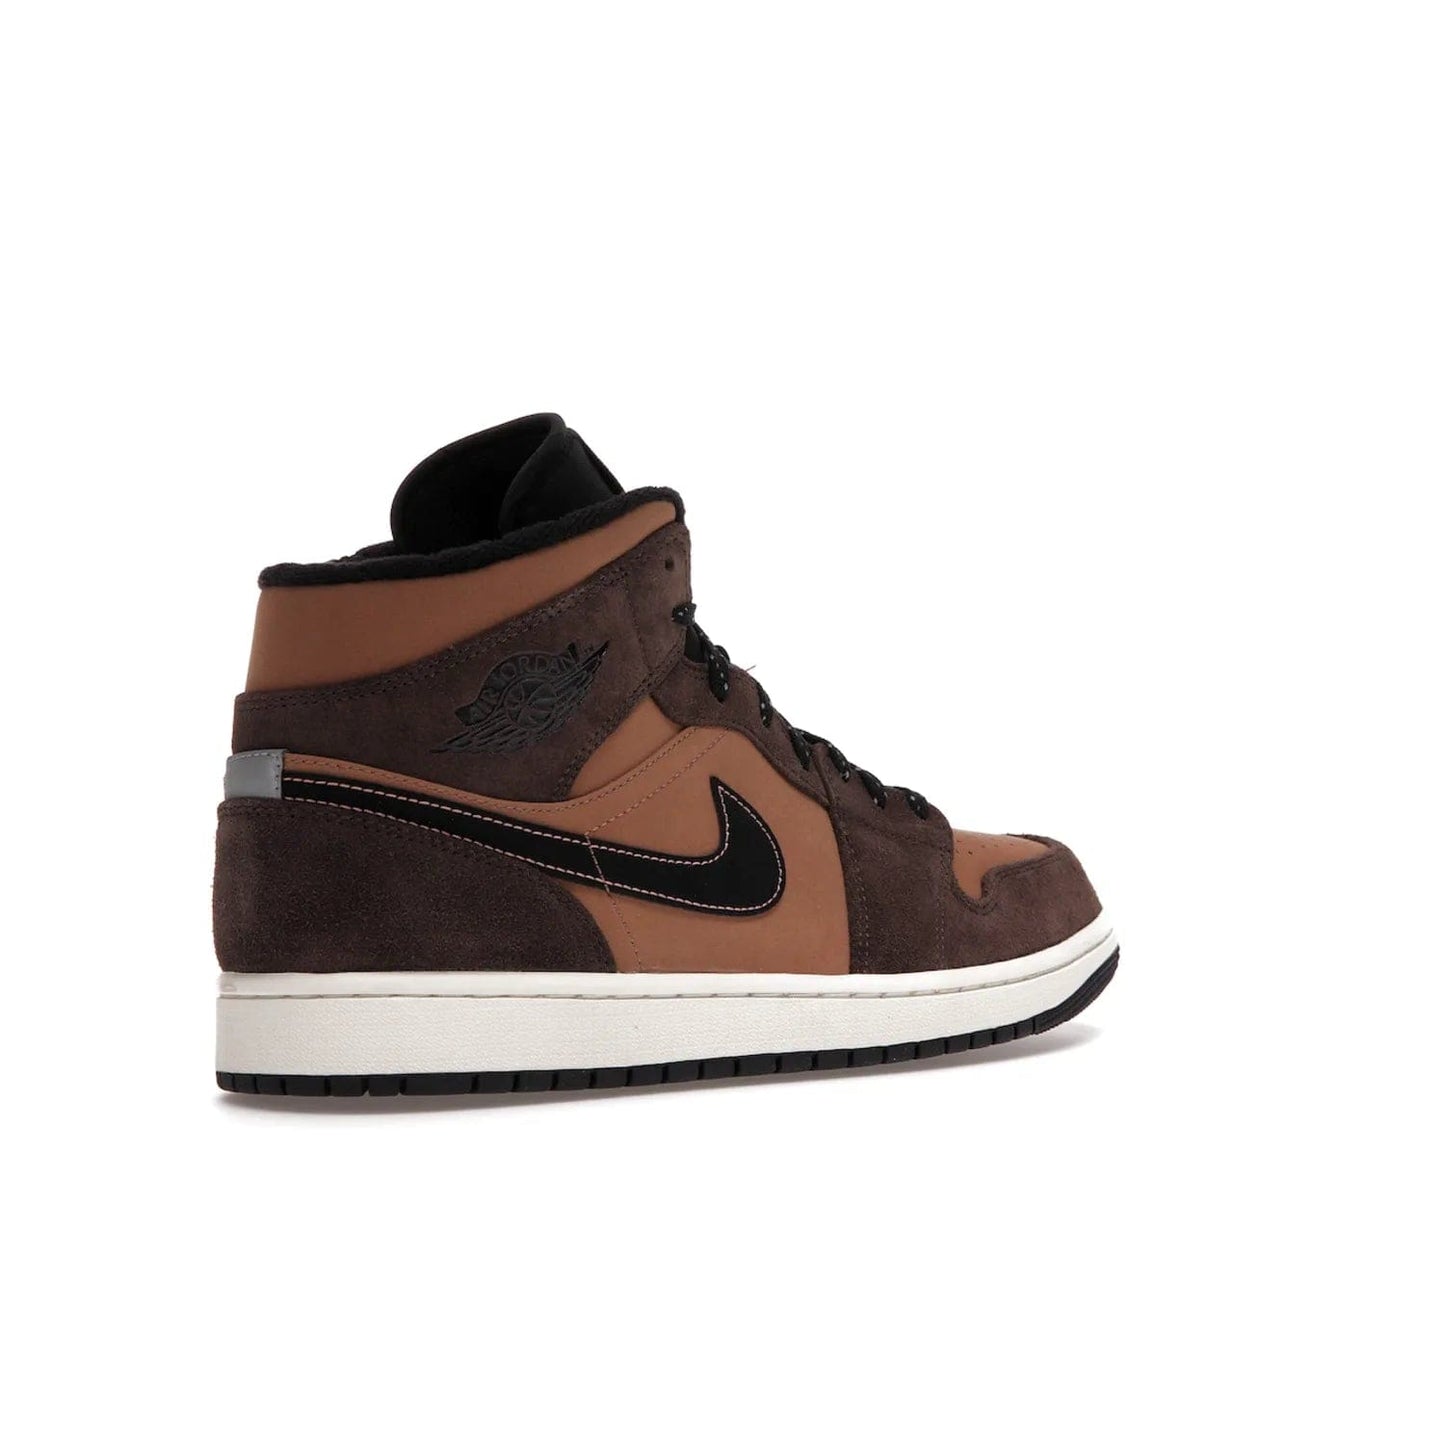 Jordan 1 Mid SE Dark Chocolate - Image 33 - Only at www.BallersClubKickz.com - This fashionable and functional Jordan 1 Mid SE Dark Chocolate features a light brown Durabuck upper, dark brown suede overlays, black Swoosh logos and reflective patch at heel. A must-have for any sneakerhead!